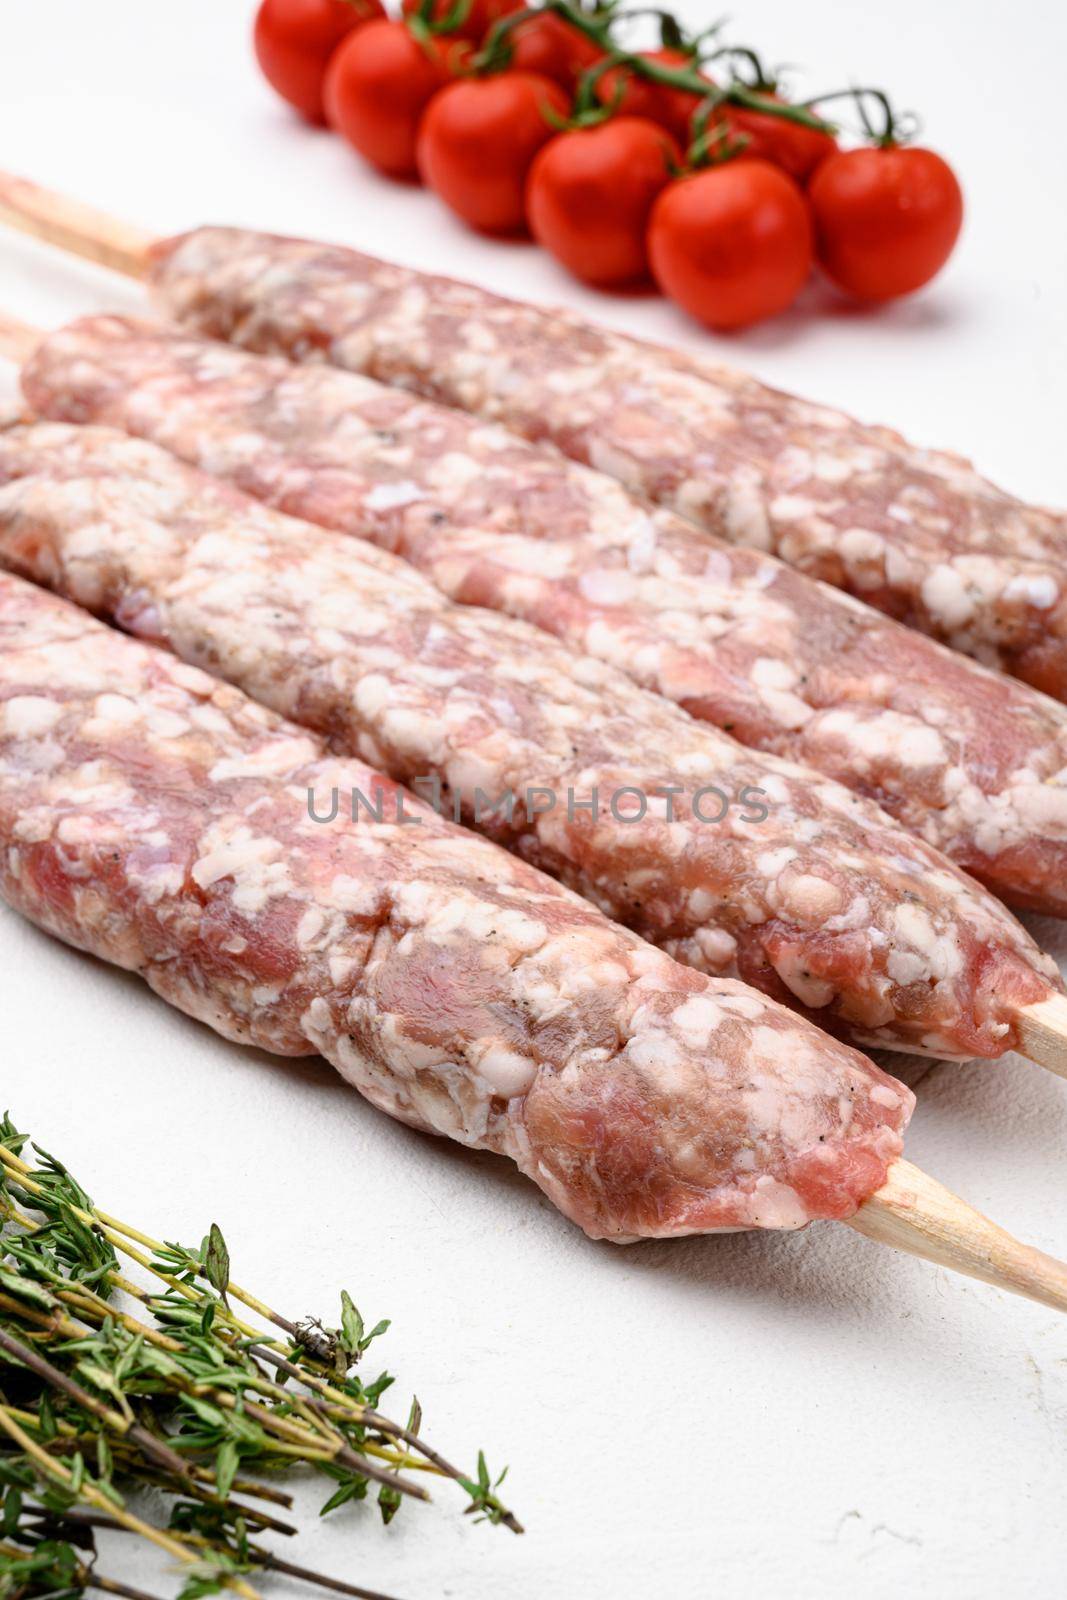 Minced and shaped lamb mutton kebabs, with grill ingredients, on white stone table background by Ilianesolenyi